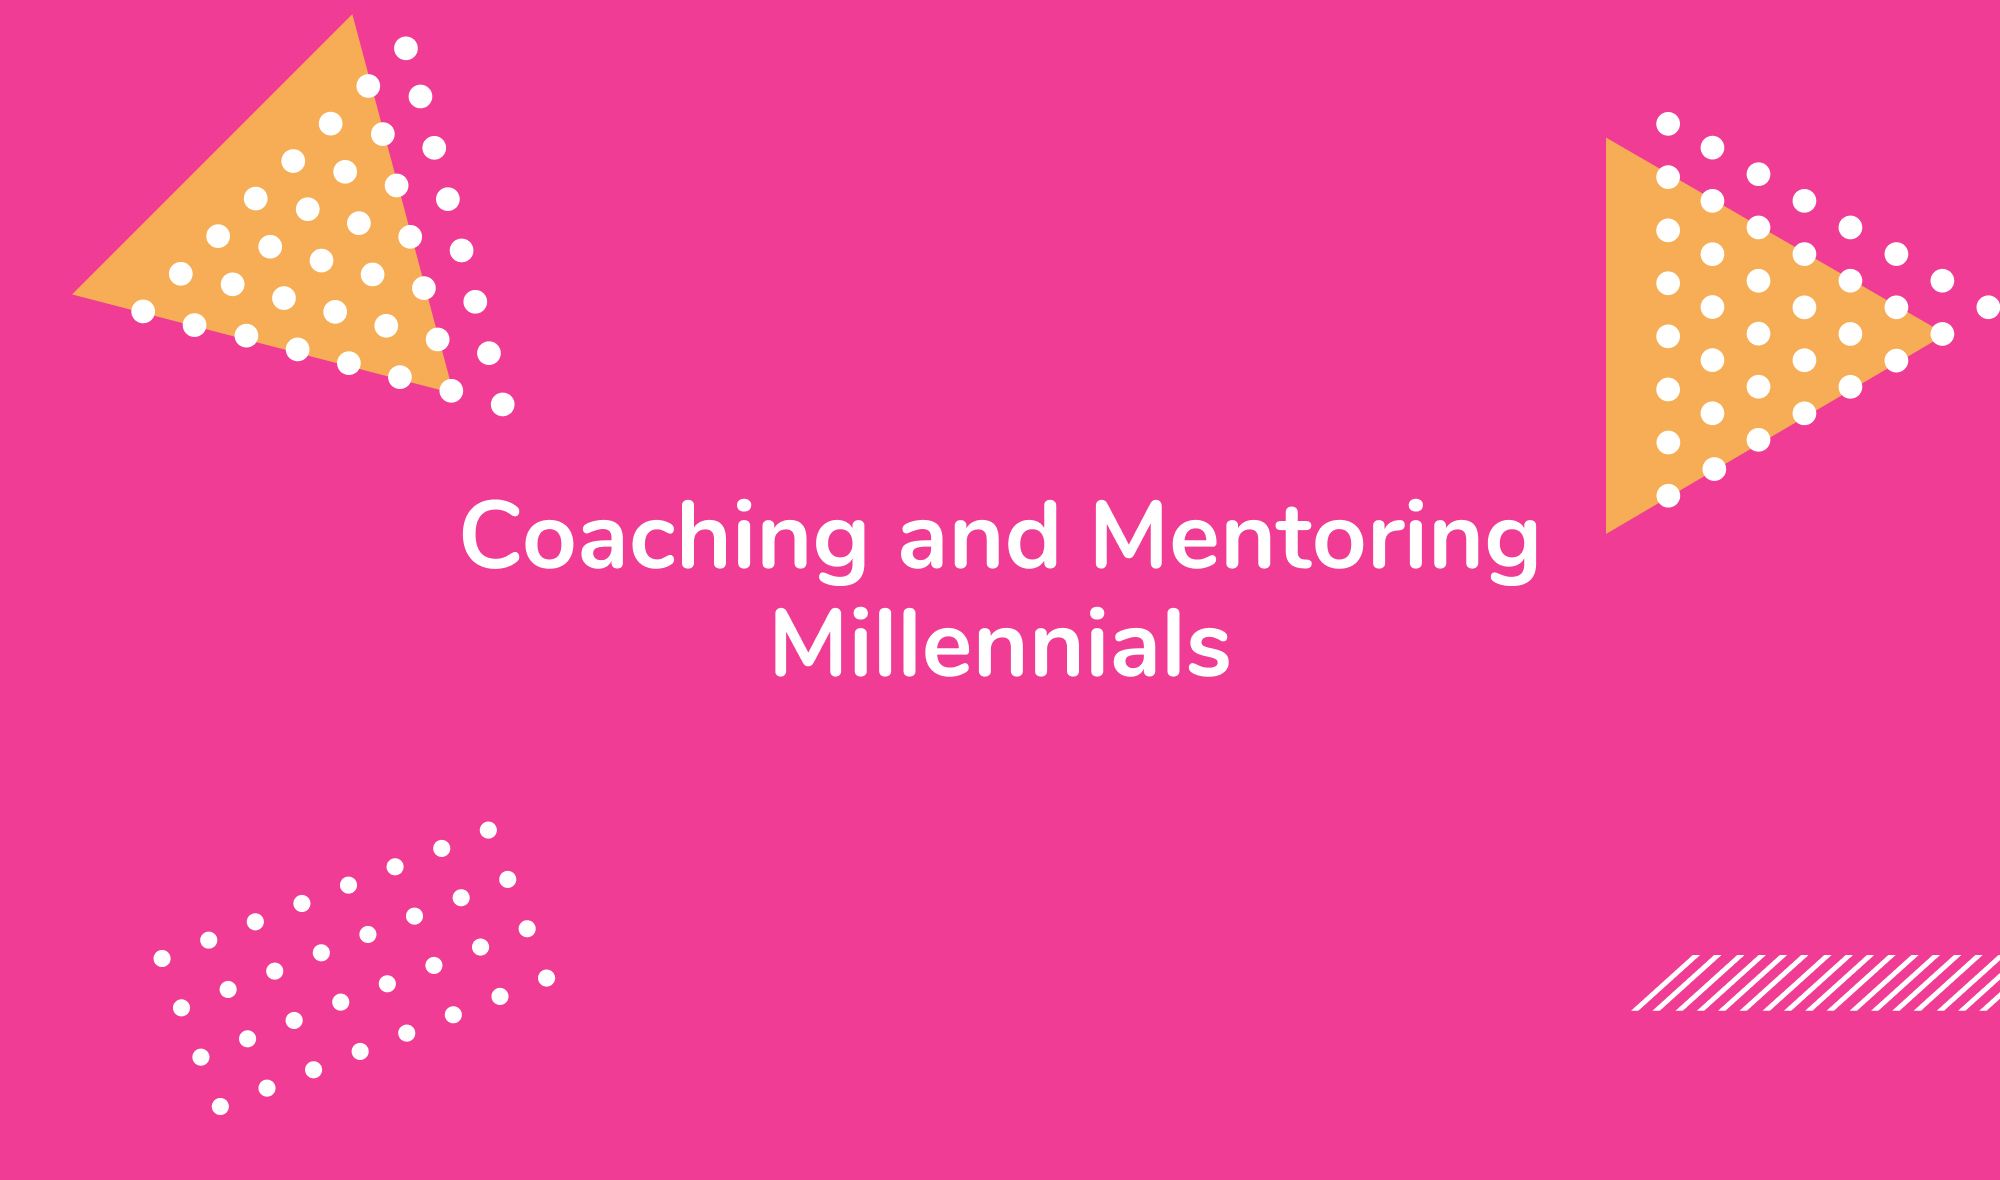 Coaching and Mentoring Millennials: Developing the Next Generation of Leaders